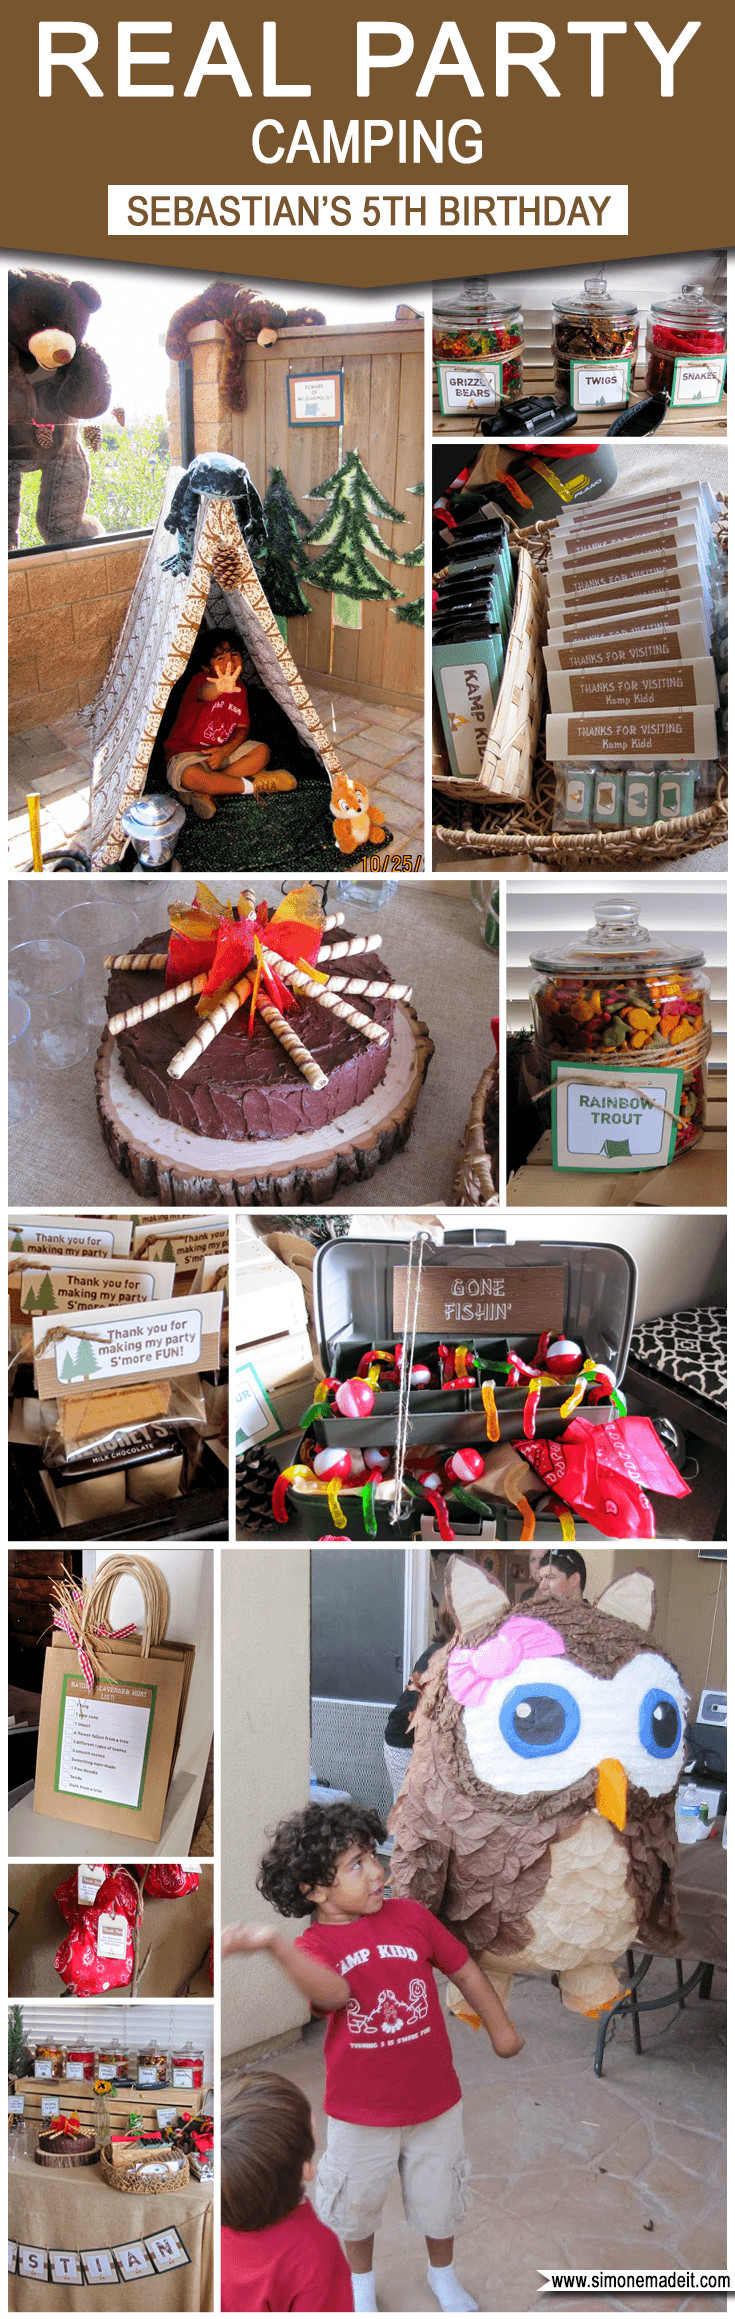 Campout Birthday Party Ideas
 Camping Birthday Party Theme